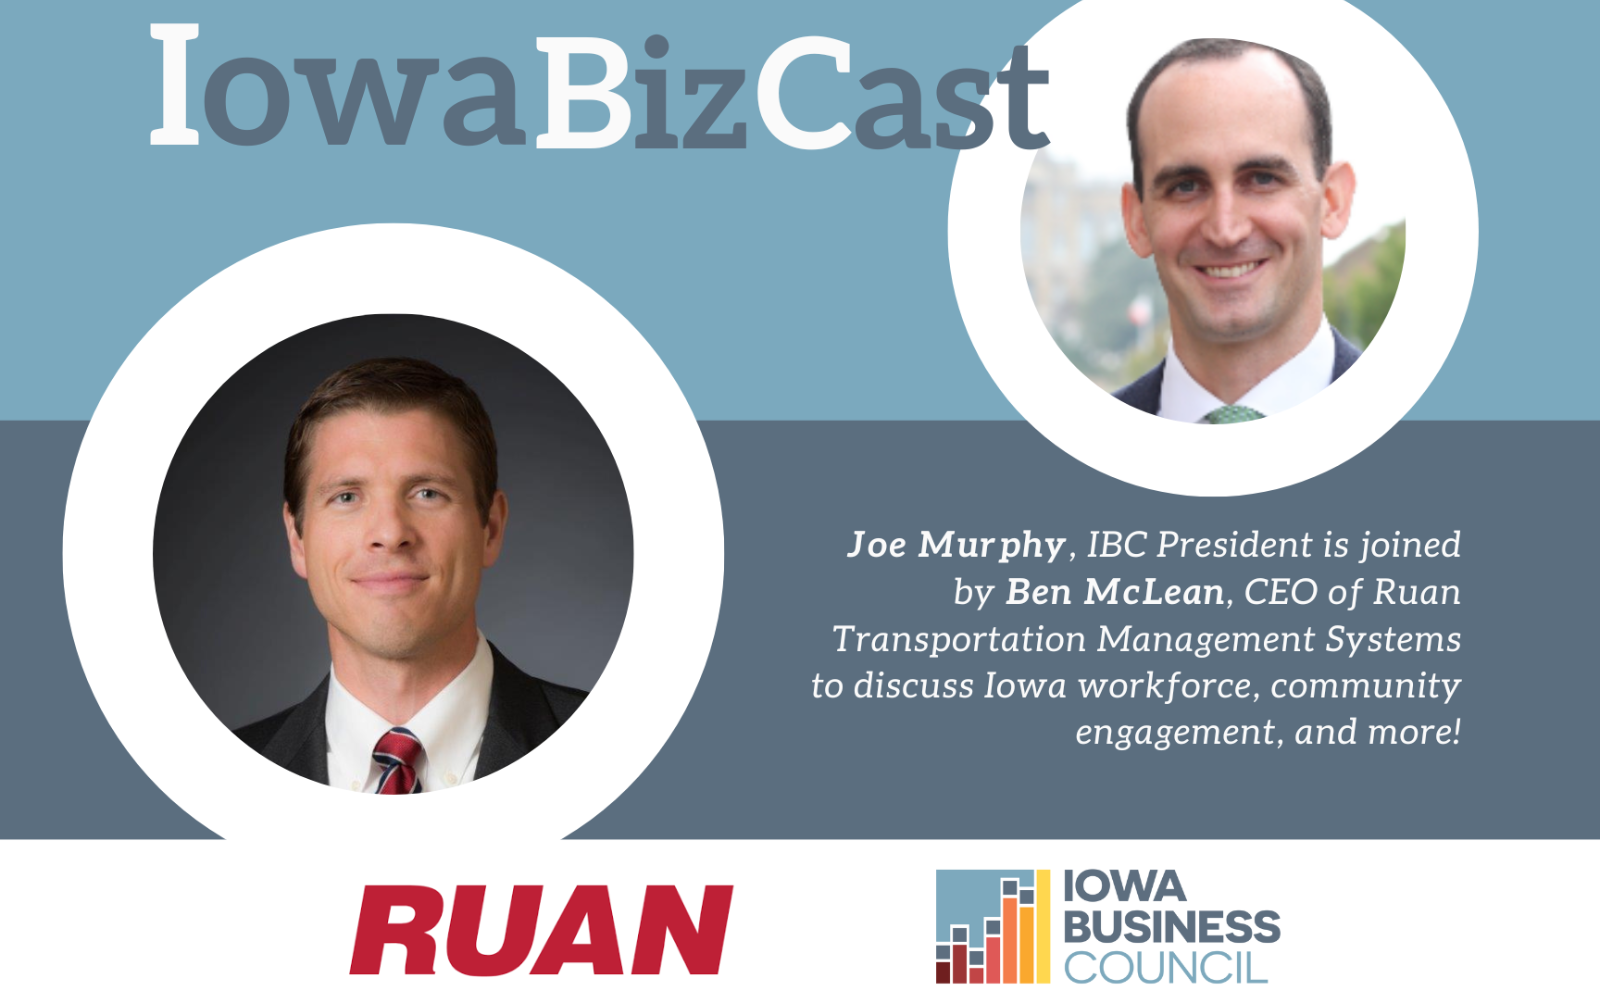 Register for the Iowa Biz Cast LIVE Webcast Here